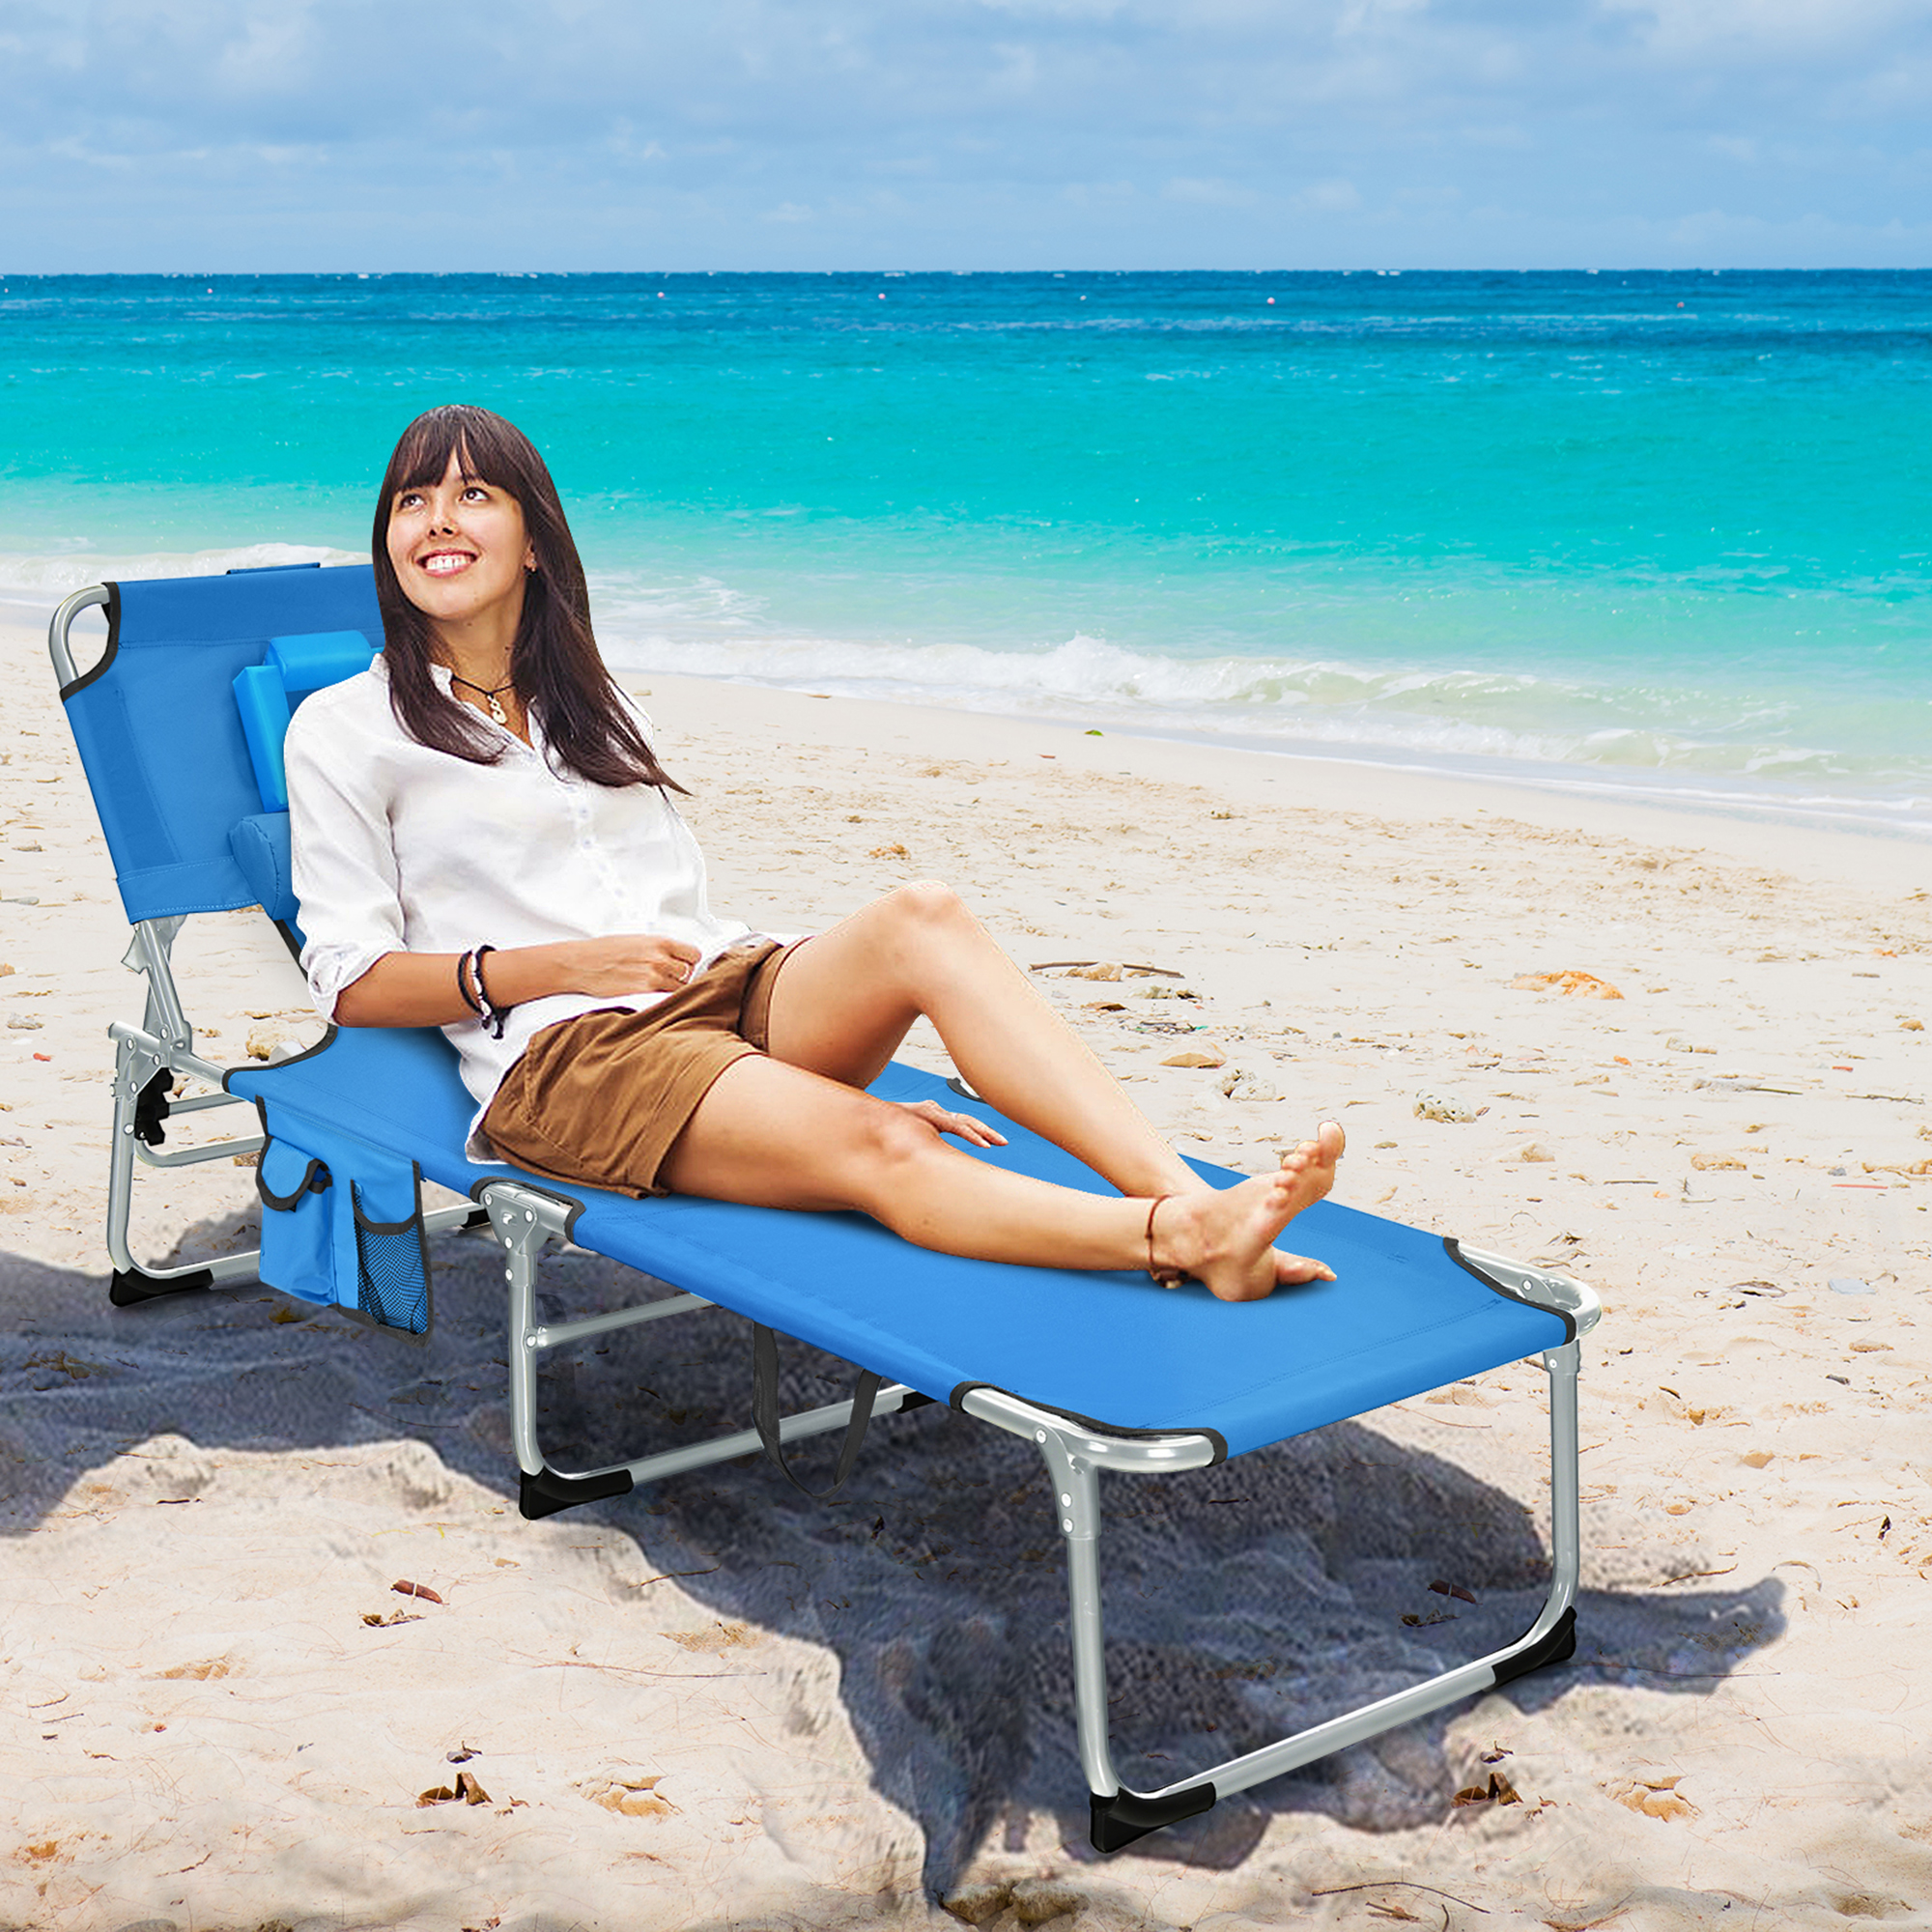 Gymax Set of 2 Beach Chaise Lounge Chair Folding Reclining Chair w/ Facing Hole Blue - image 4 of 10